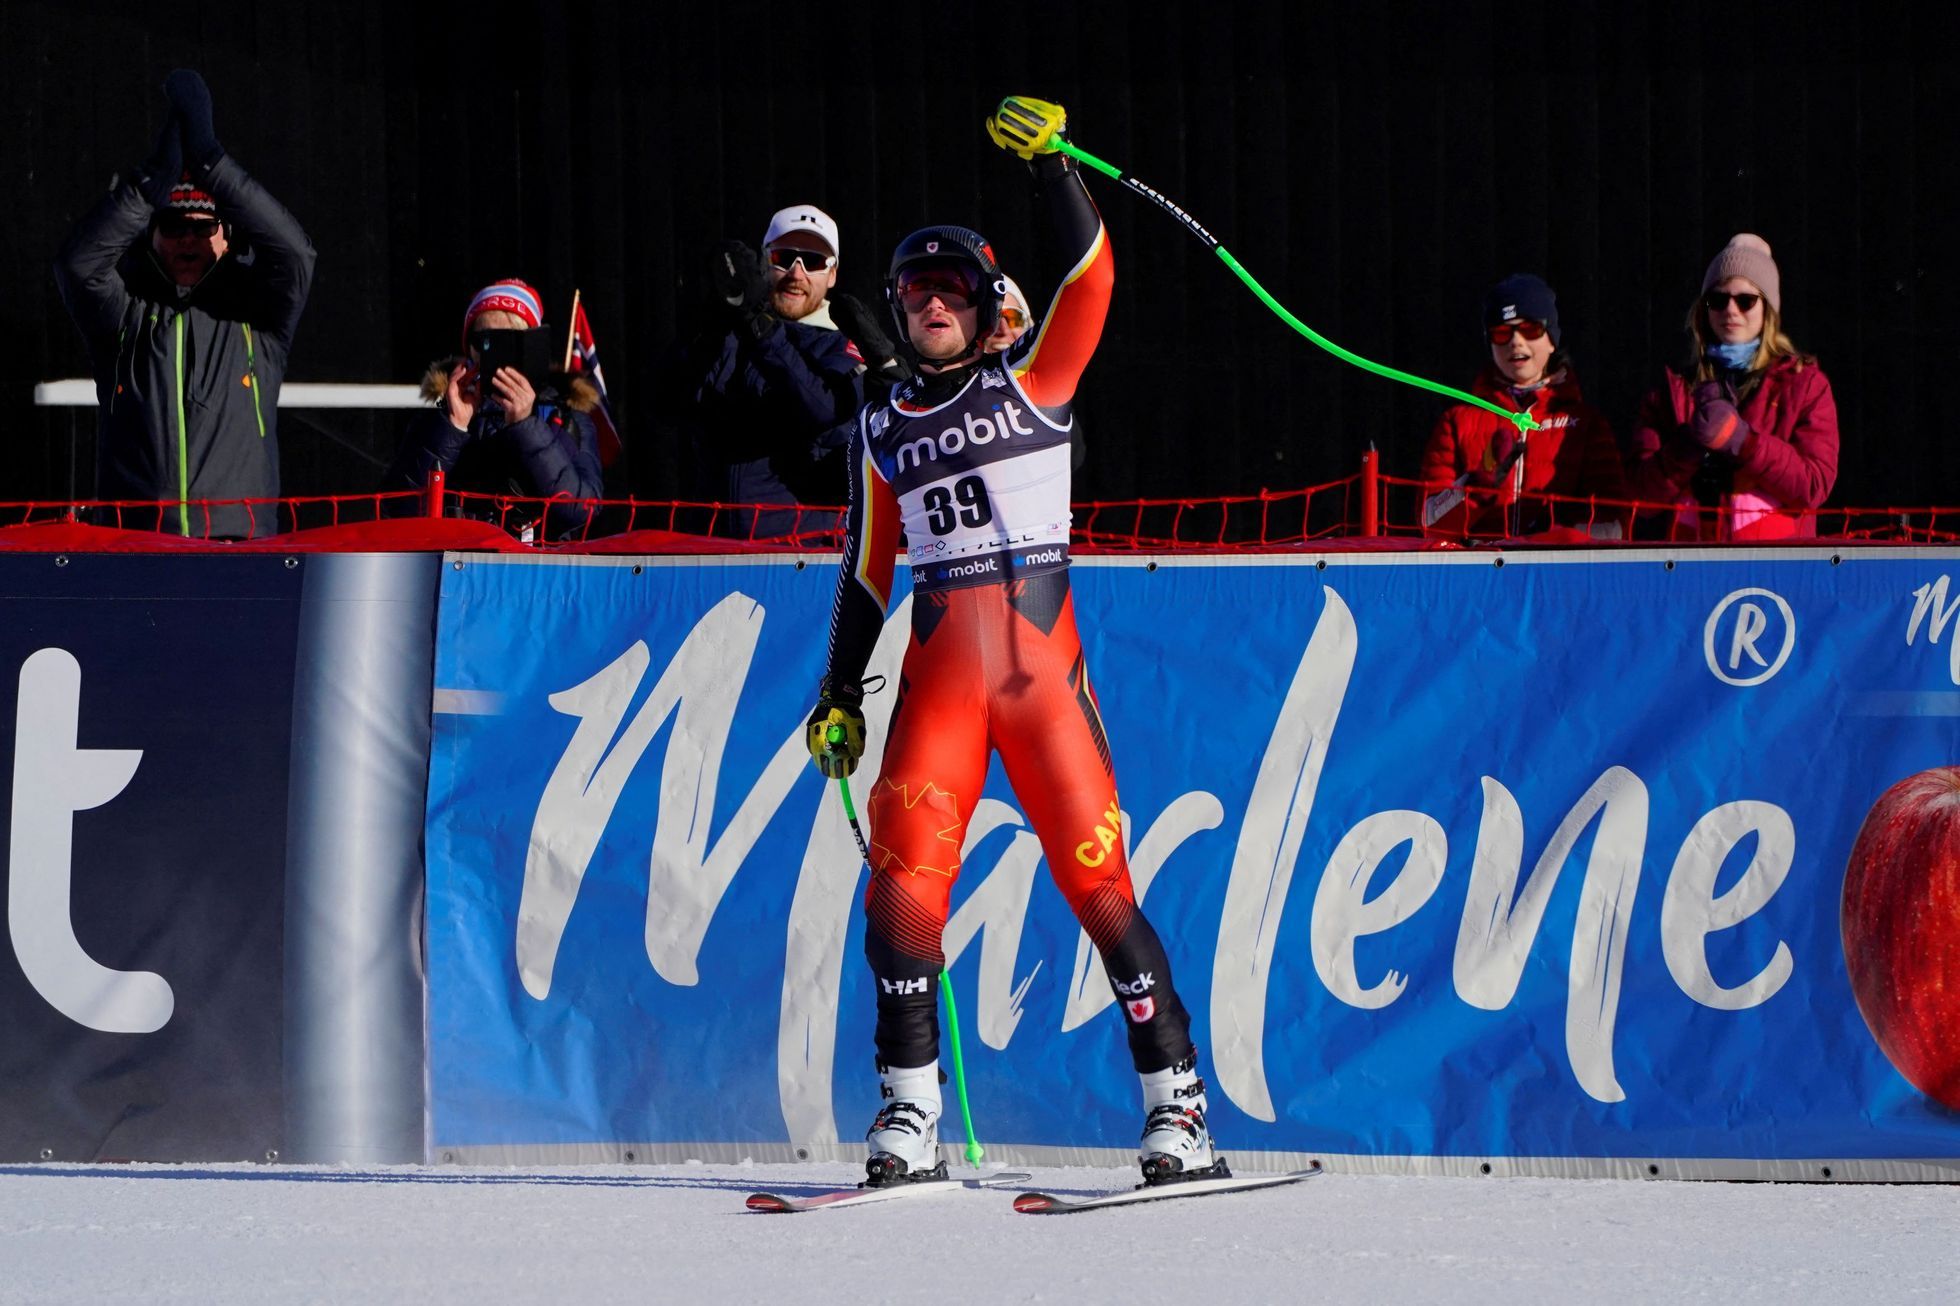 Alexander surprised the skiers, for a joint victory he finished with the starting number 39